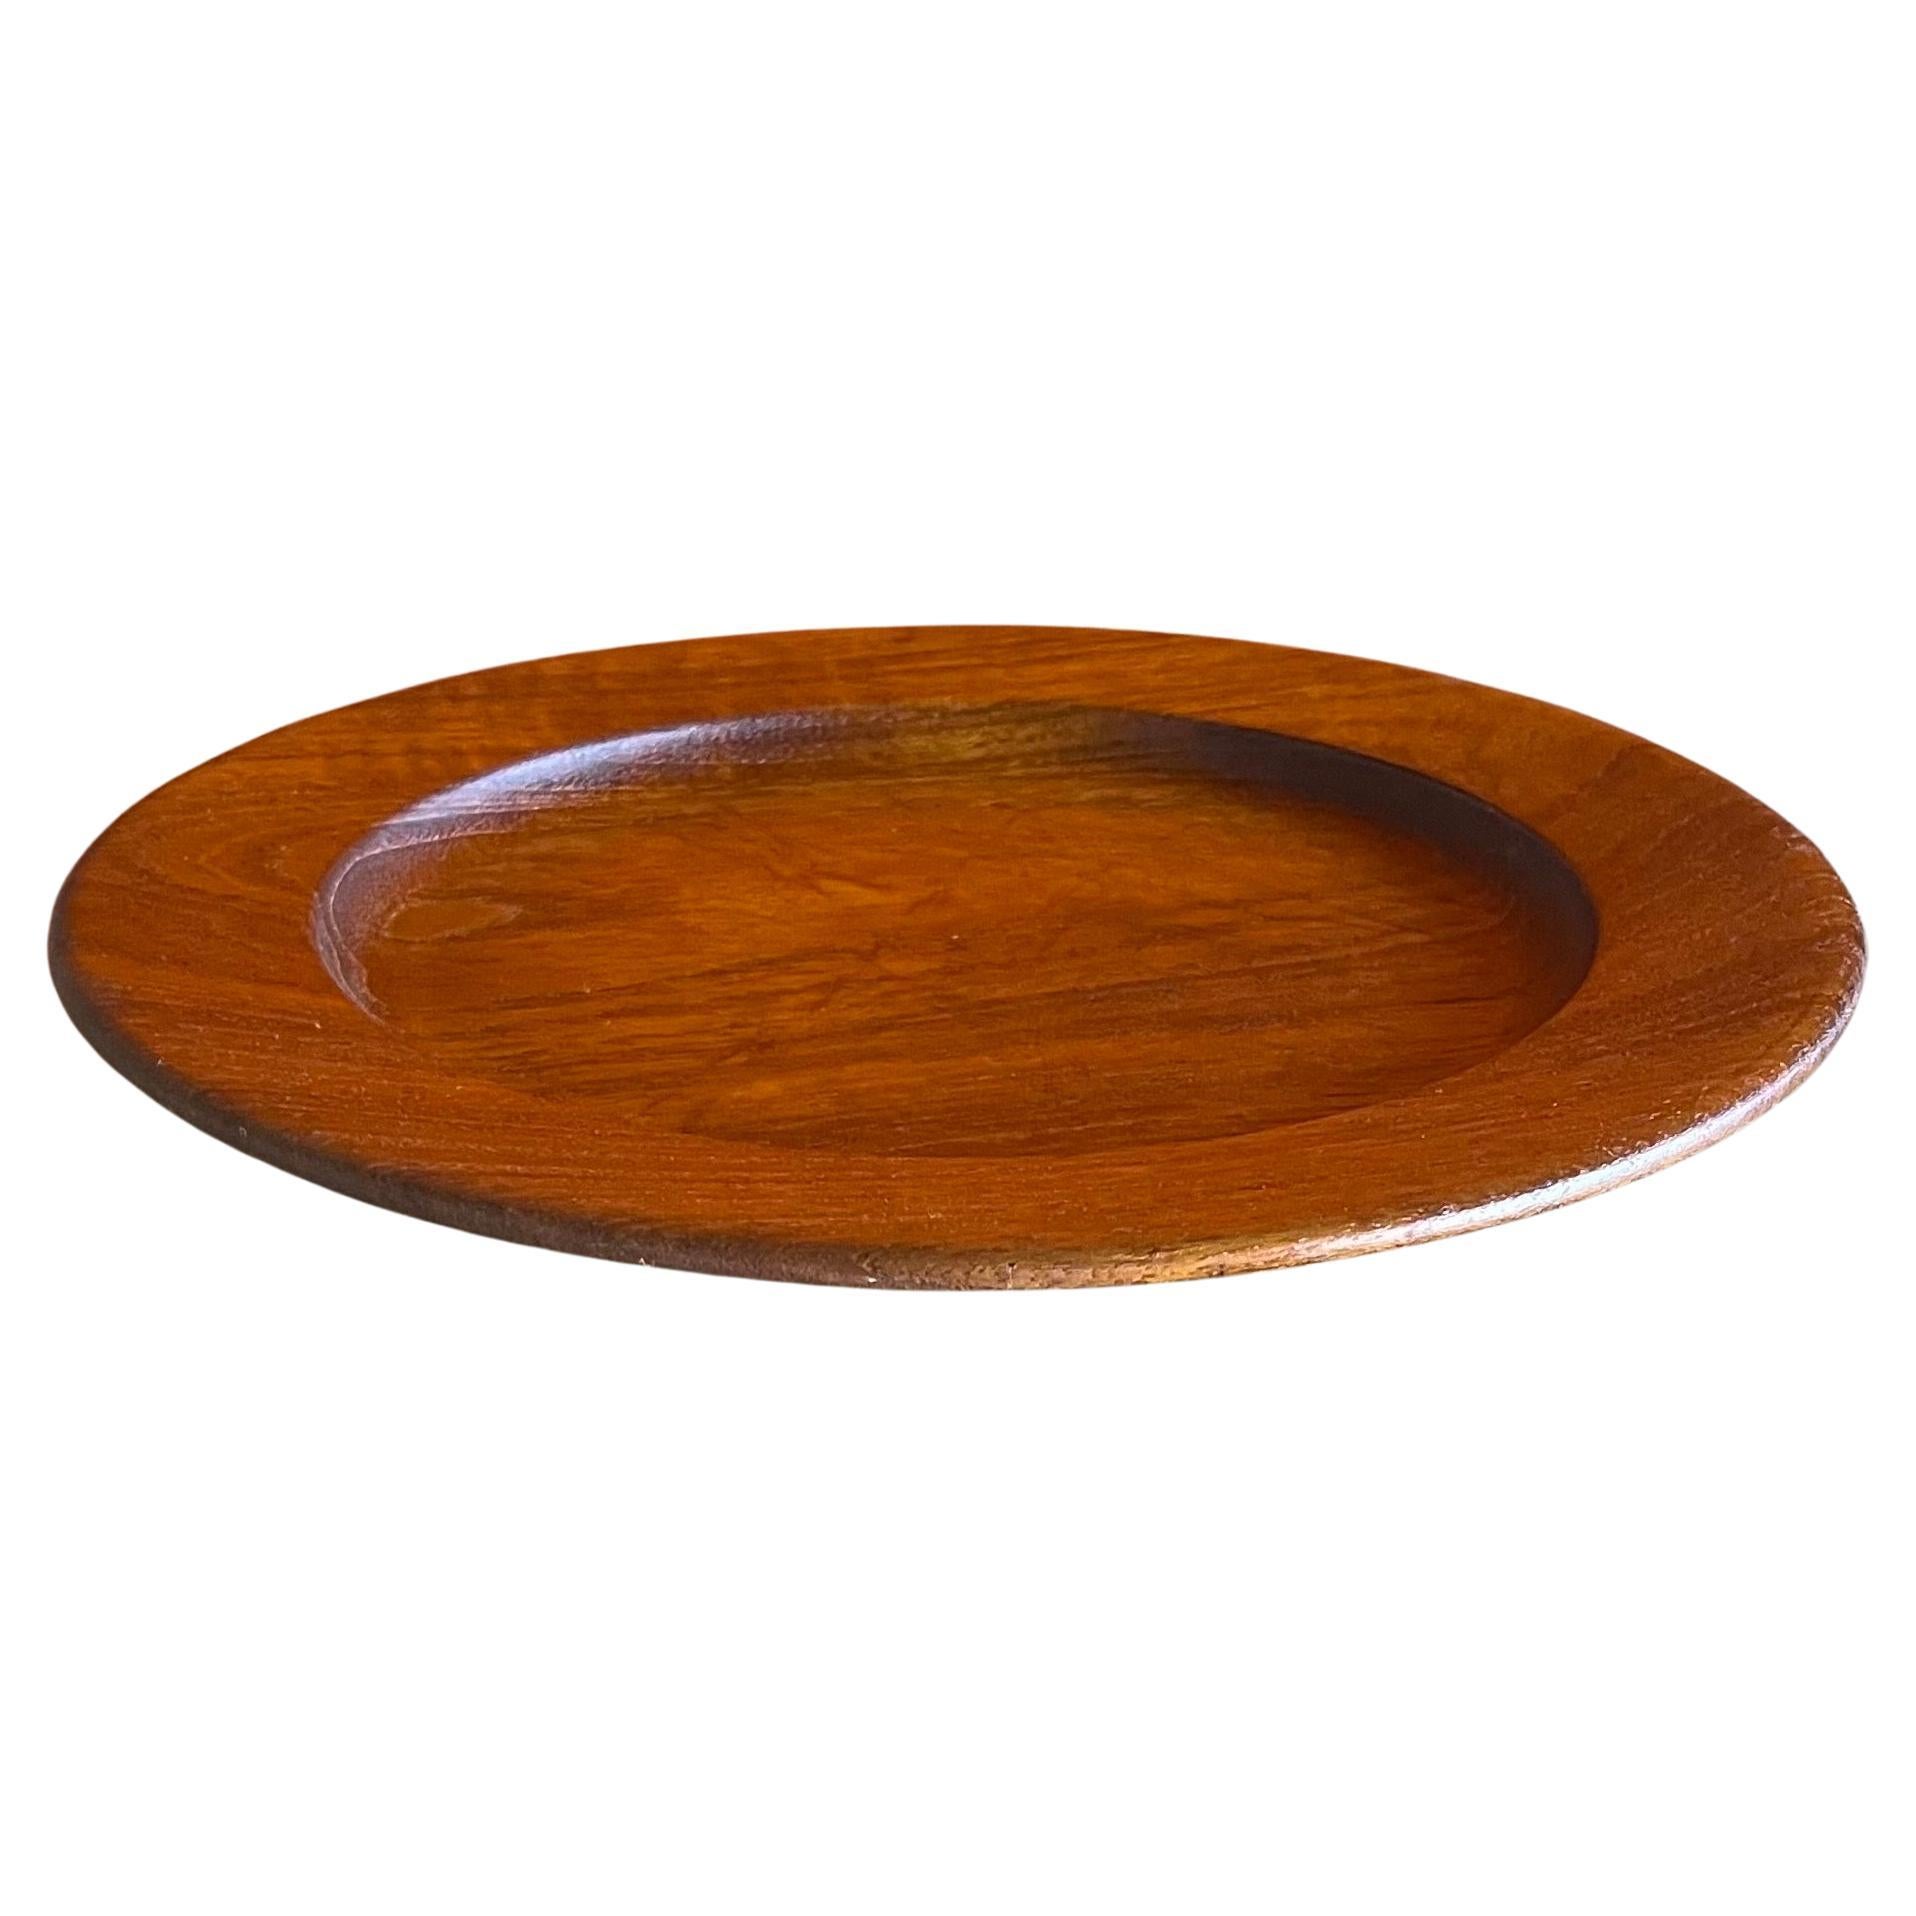 A Danish modern solid teak serving plate by Kay Bojesen, circa 1950s.  The plate is in good vintage condition and measures 10.75